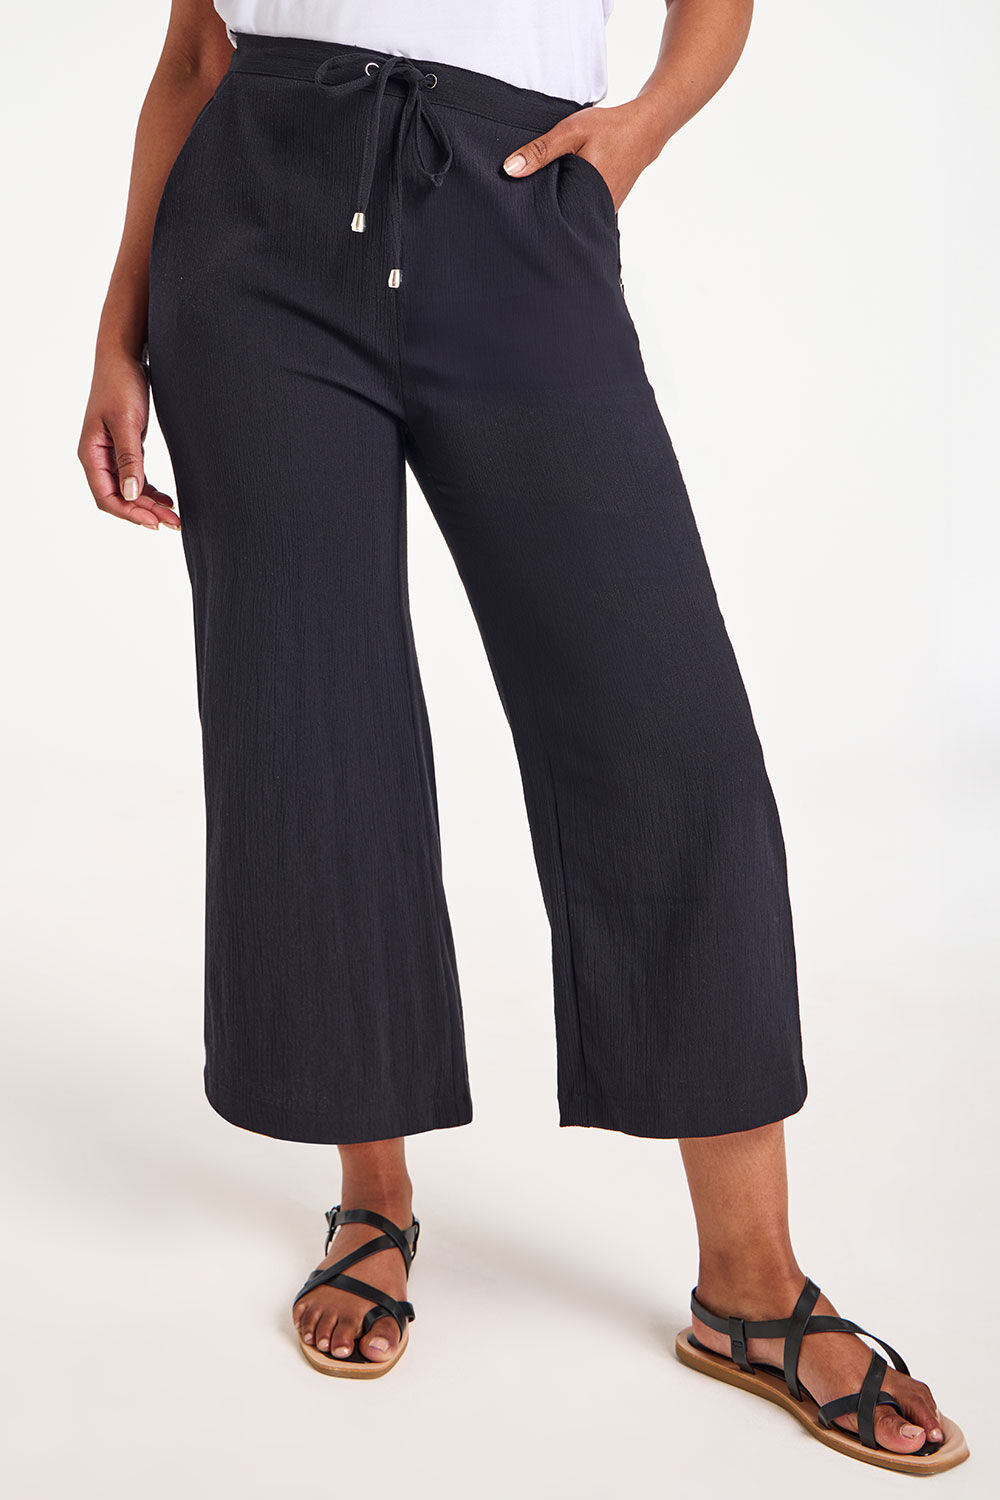 Bonmarche Black Textured Wide Leg Elasticated Cropped Trousers, Size: 10